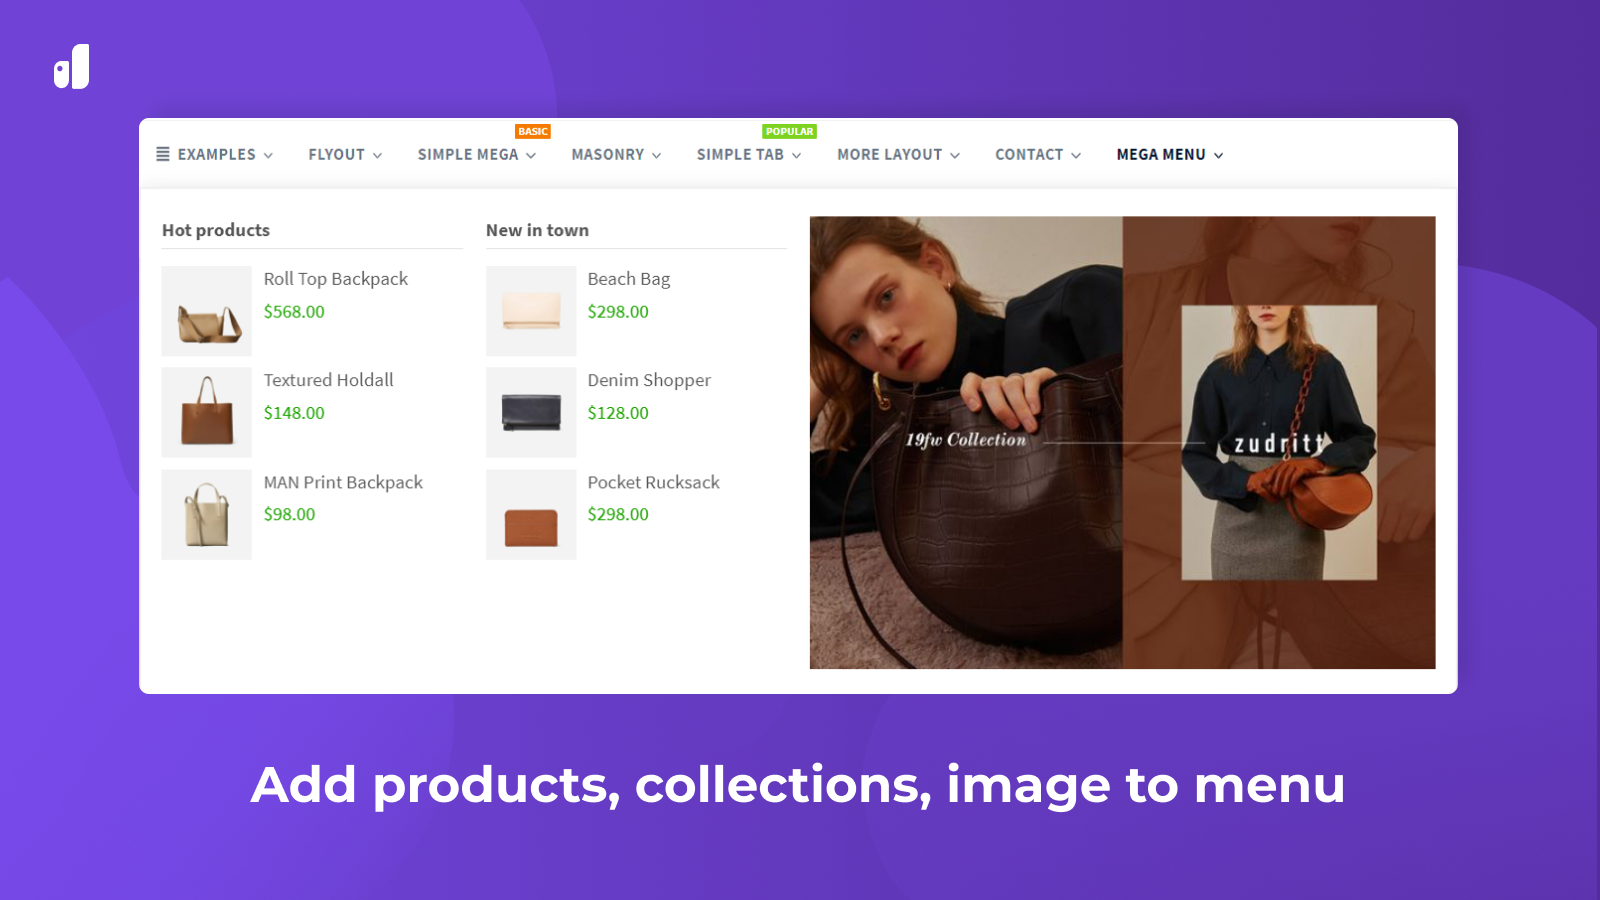 Add products, collections, image to menu